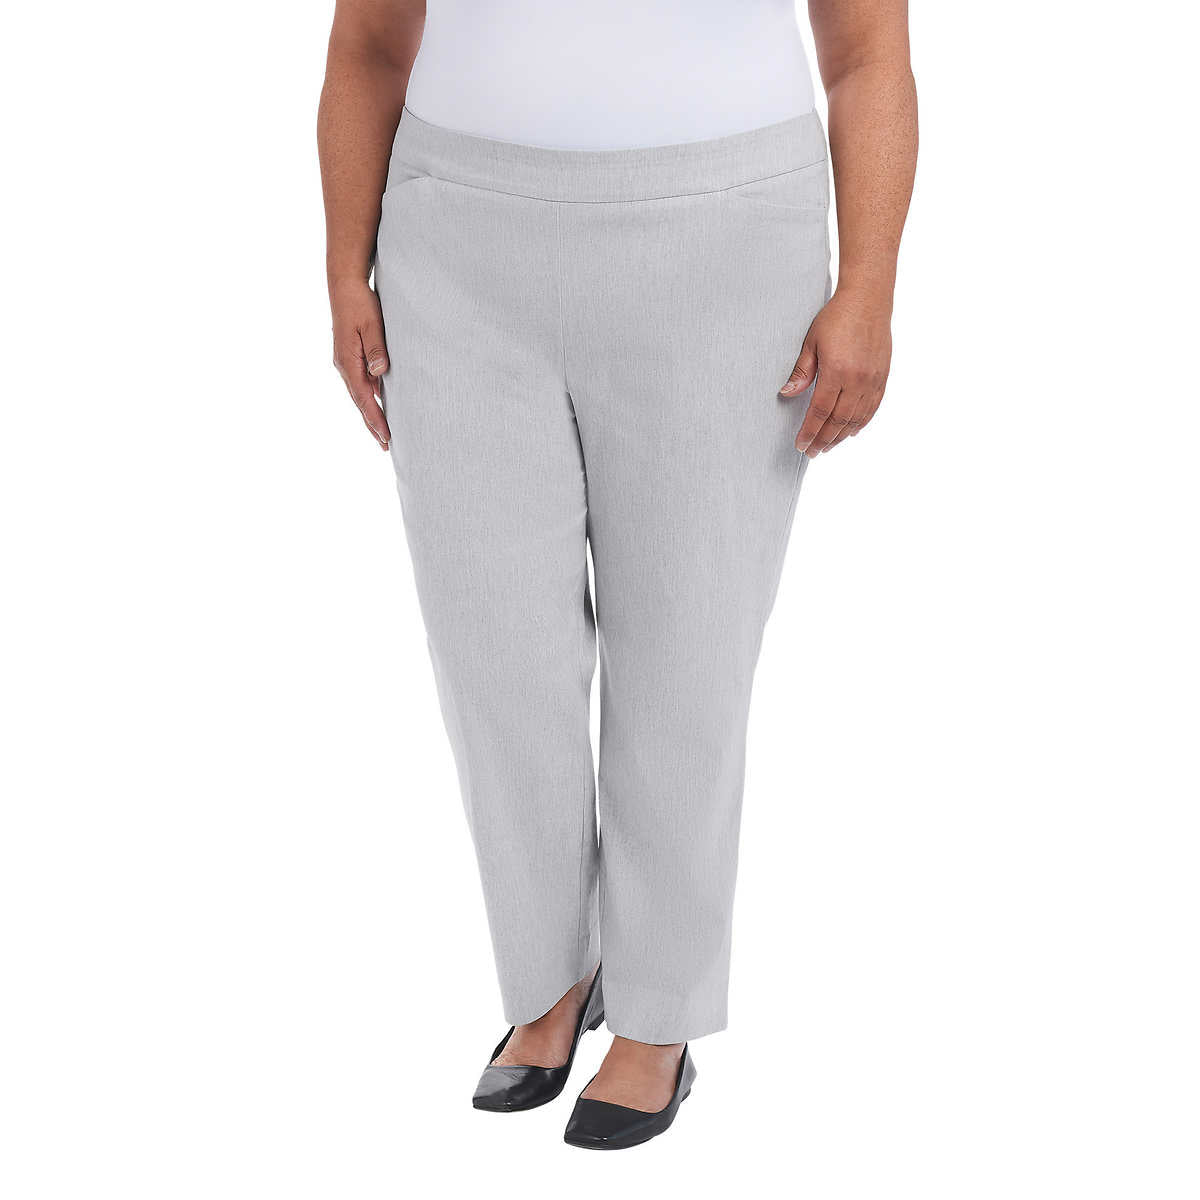 Hilary Radley Ladies' Pull On Ankle 26in Inseam Tummy Control Pants | H52